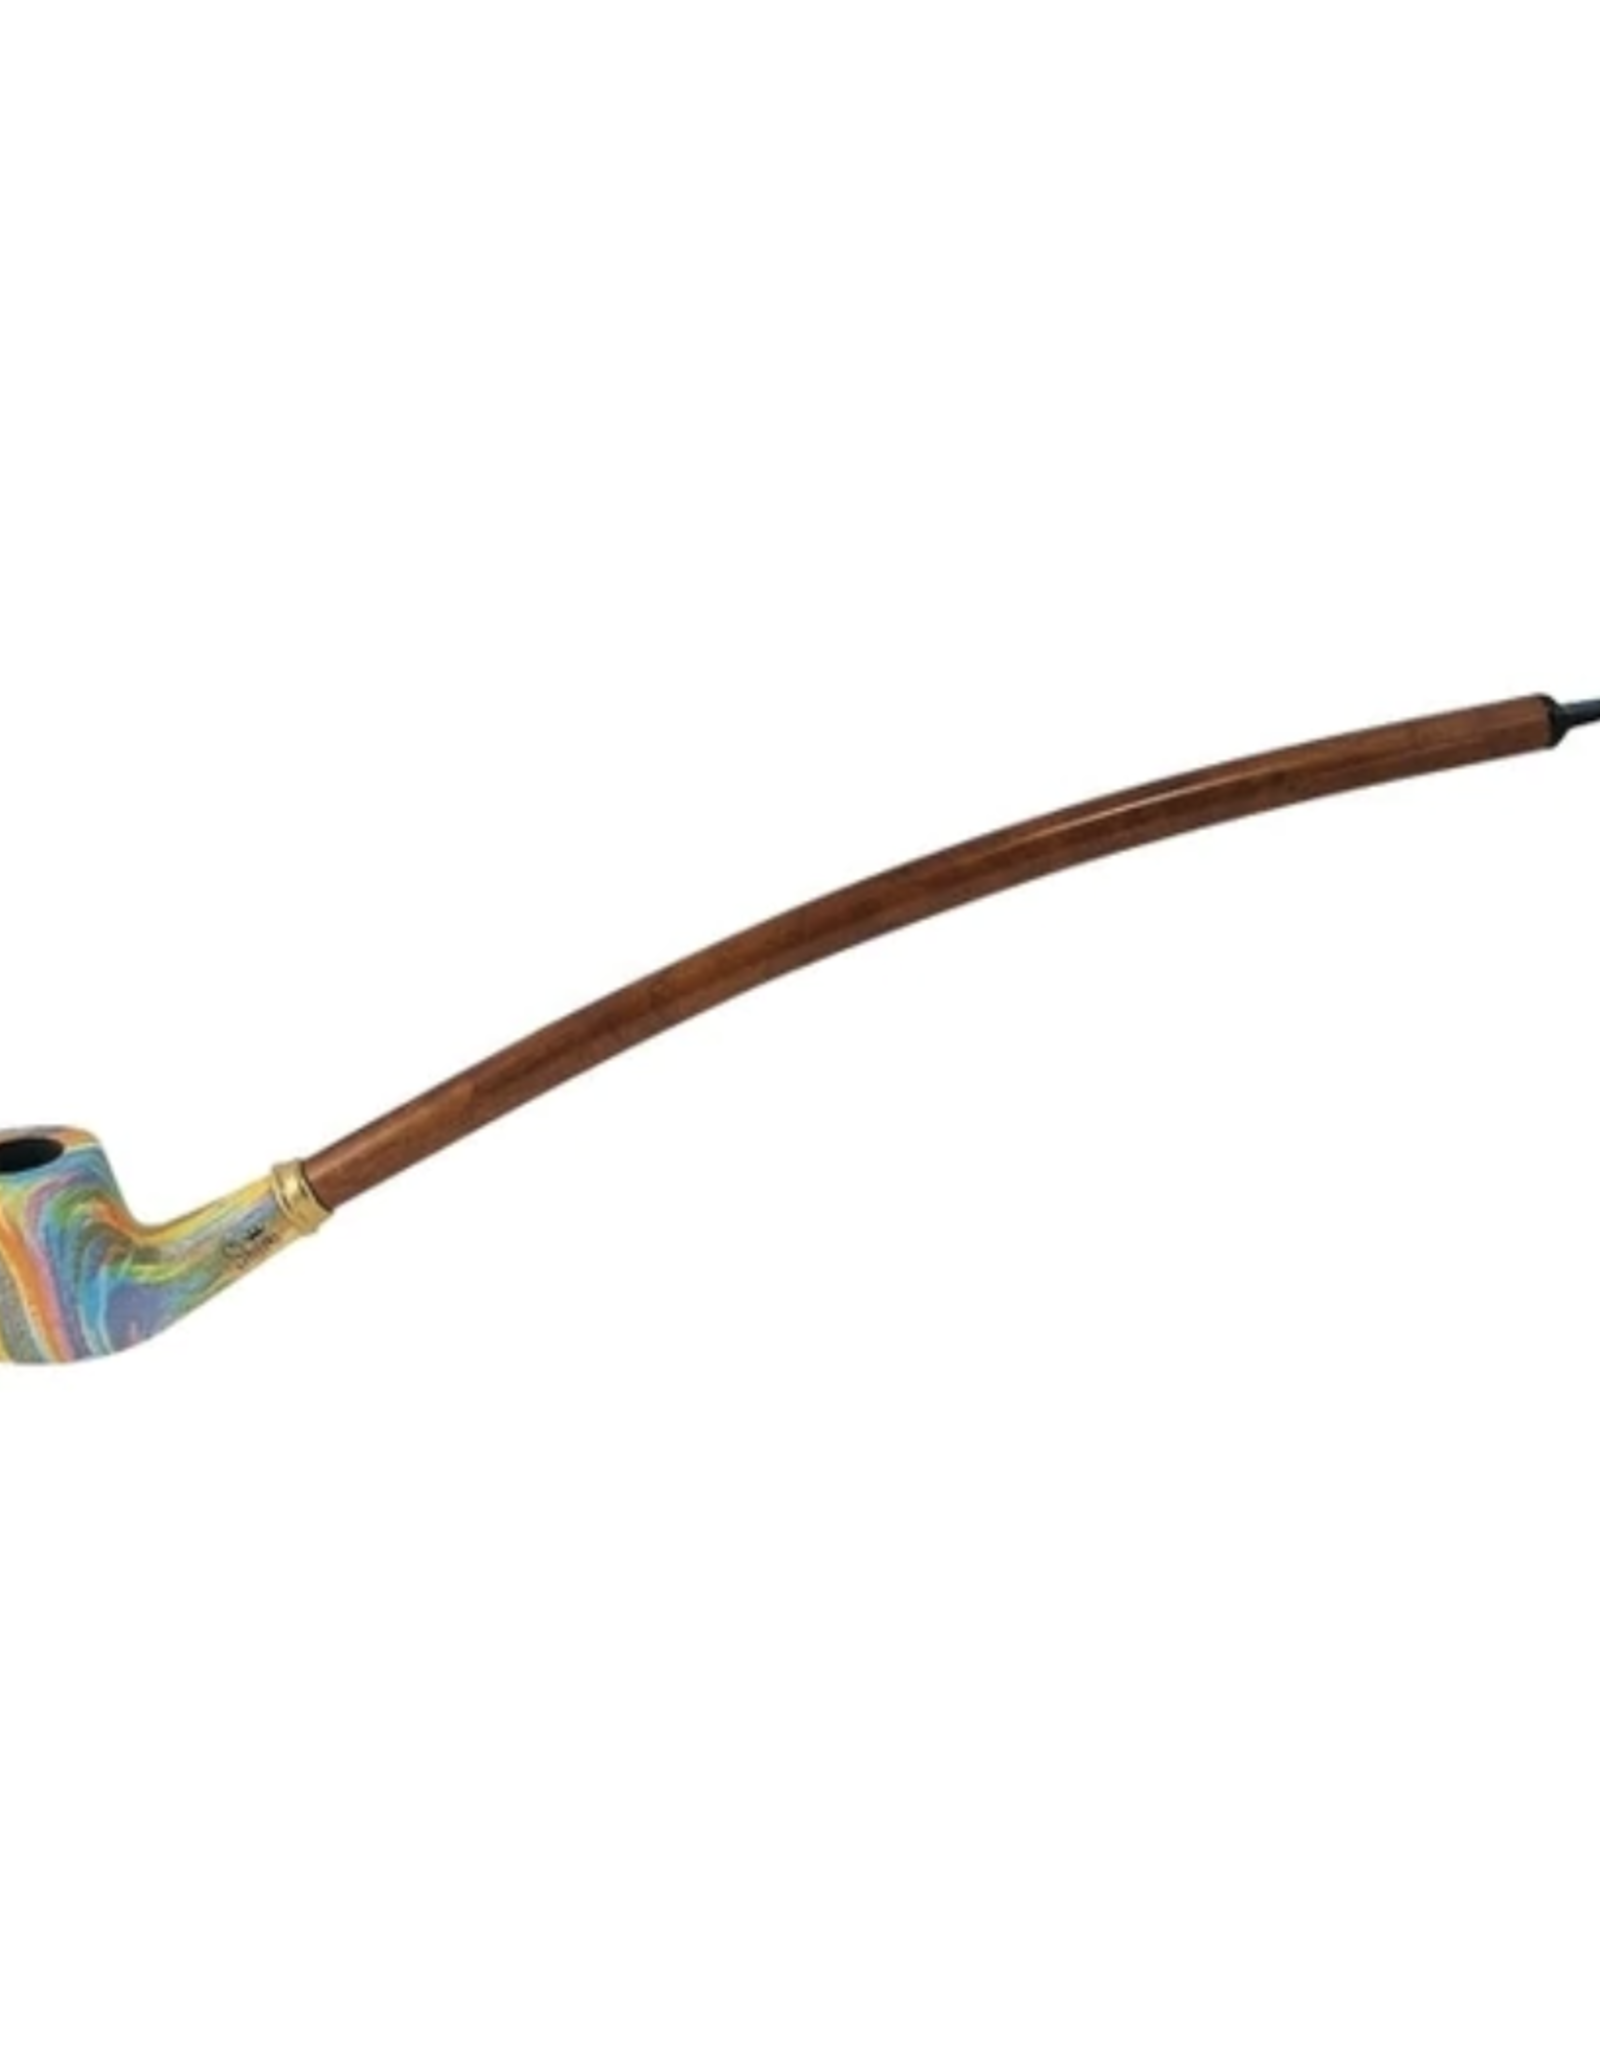 15" Curved Cherrywood Rainbow Bowl Pipe by Shire Pipes